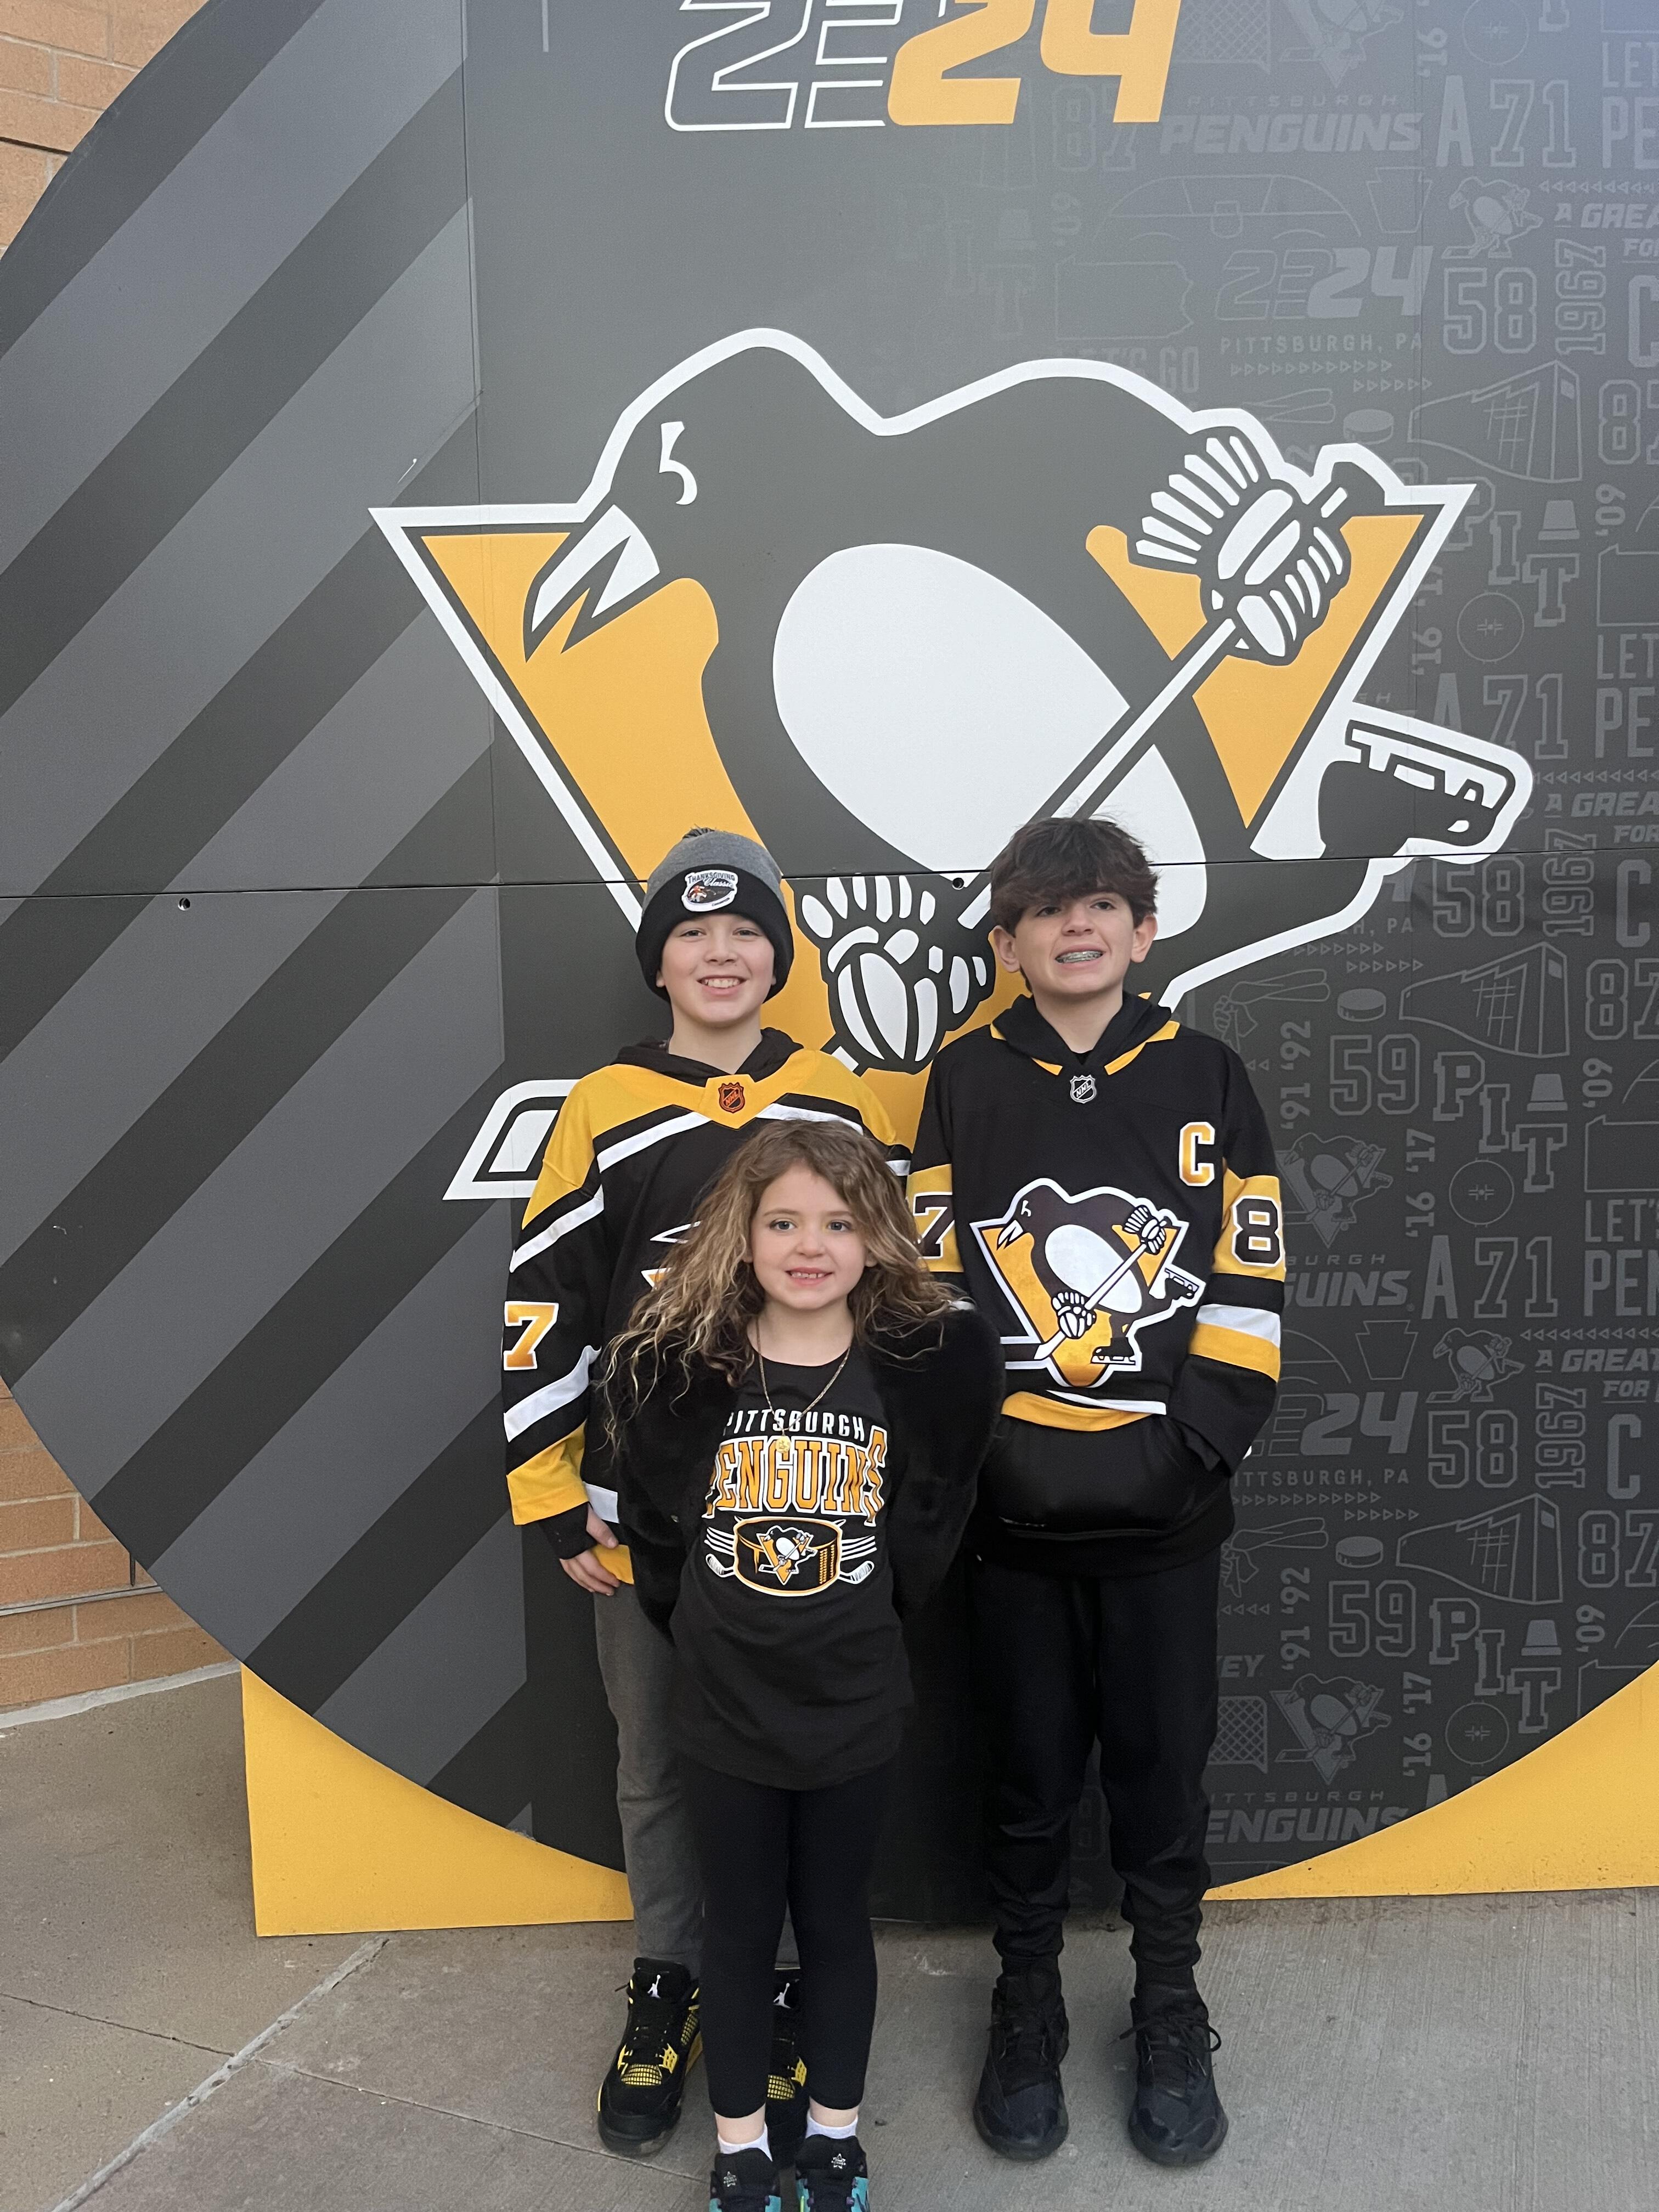 SV families at Pens game